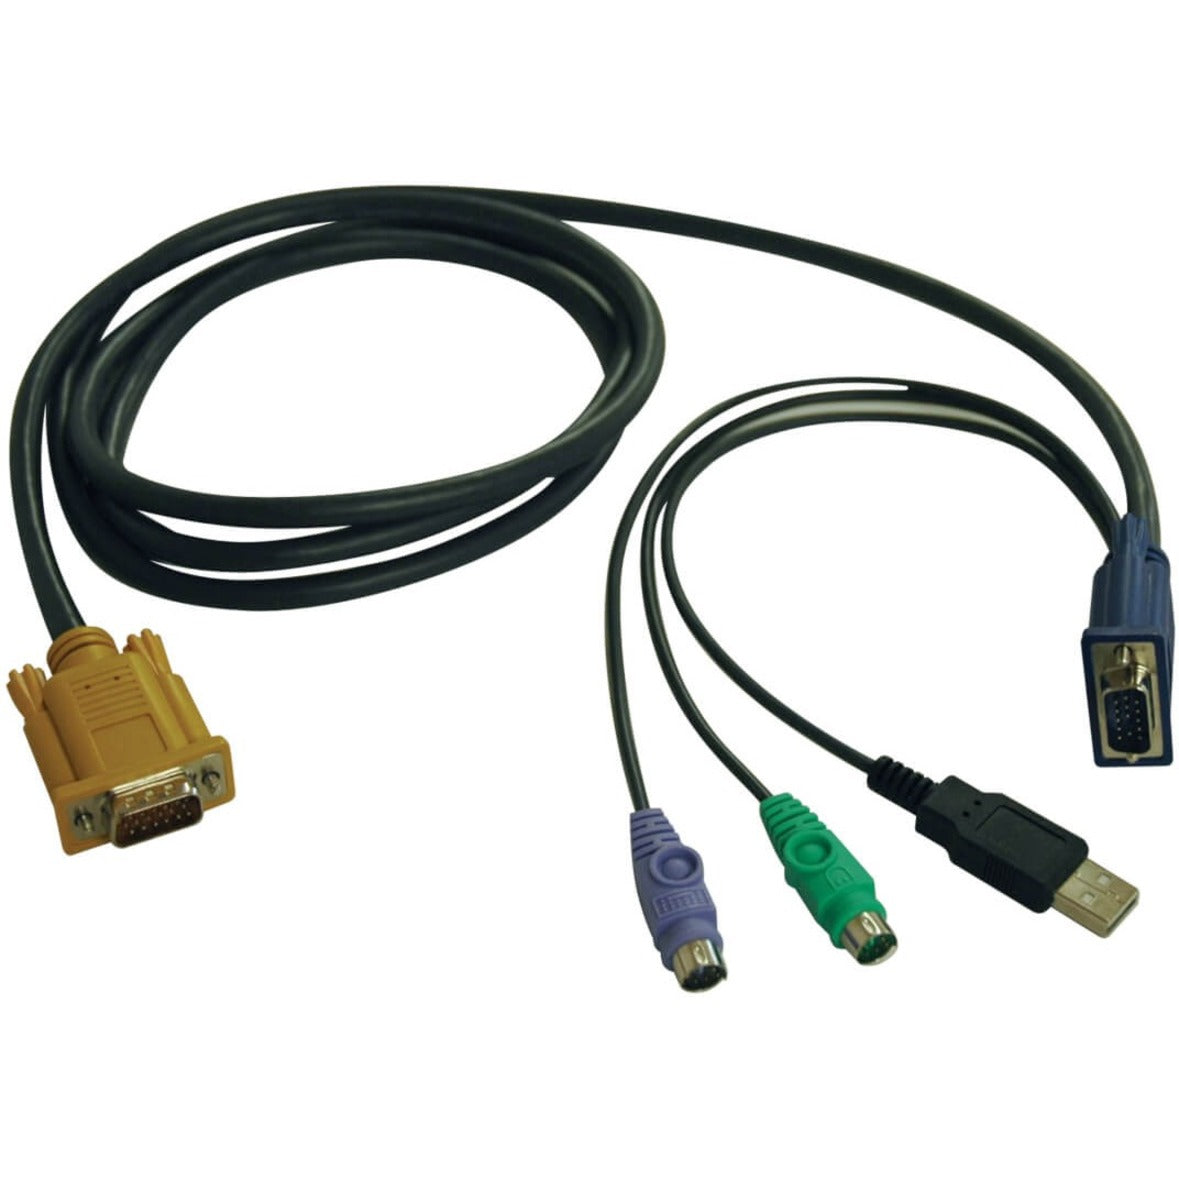 Tripp Lite P778-010 KVM Cable Adapter, 10 ft, Molded, Copper Conductor, Shielded, Black